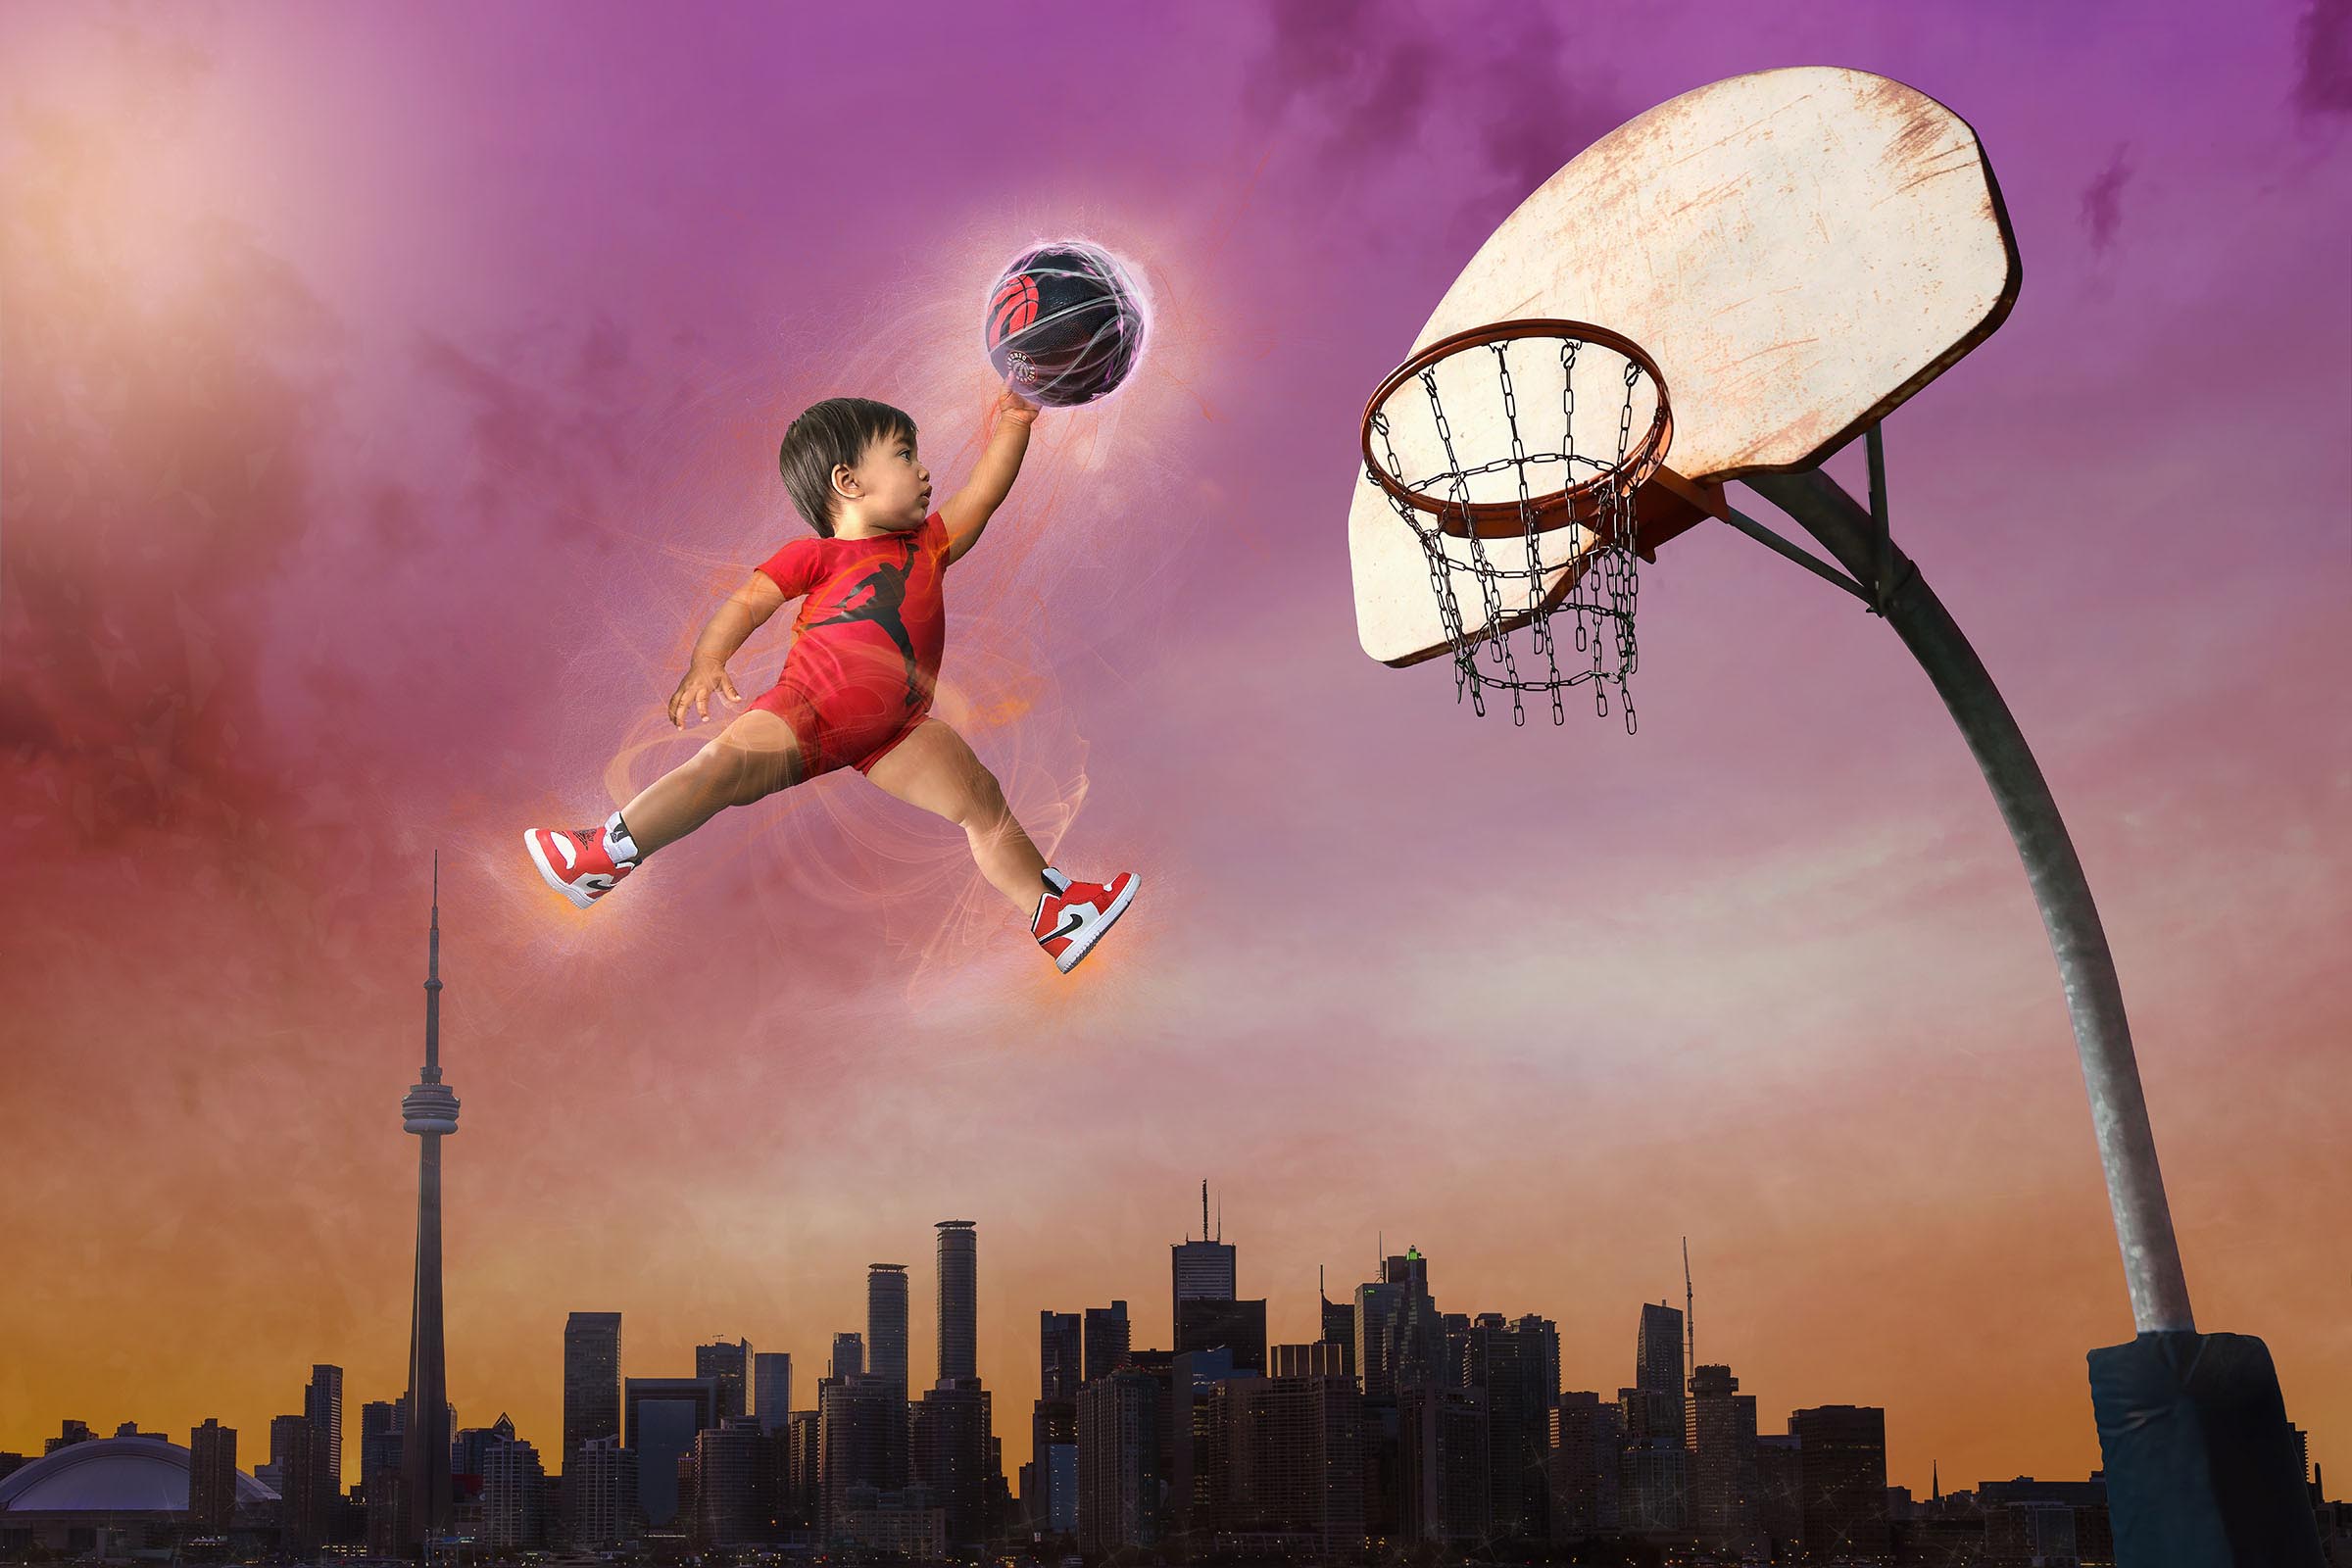 Baby boy flying in the air dunking a Toronto Raptors basketball into a hoop with city of Toronto below him composite by Vaudreuil-Soulanges and West Island of Montreal photographer Tobi Malette